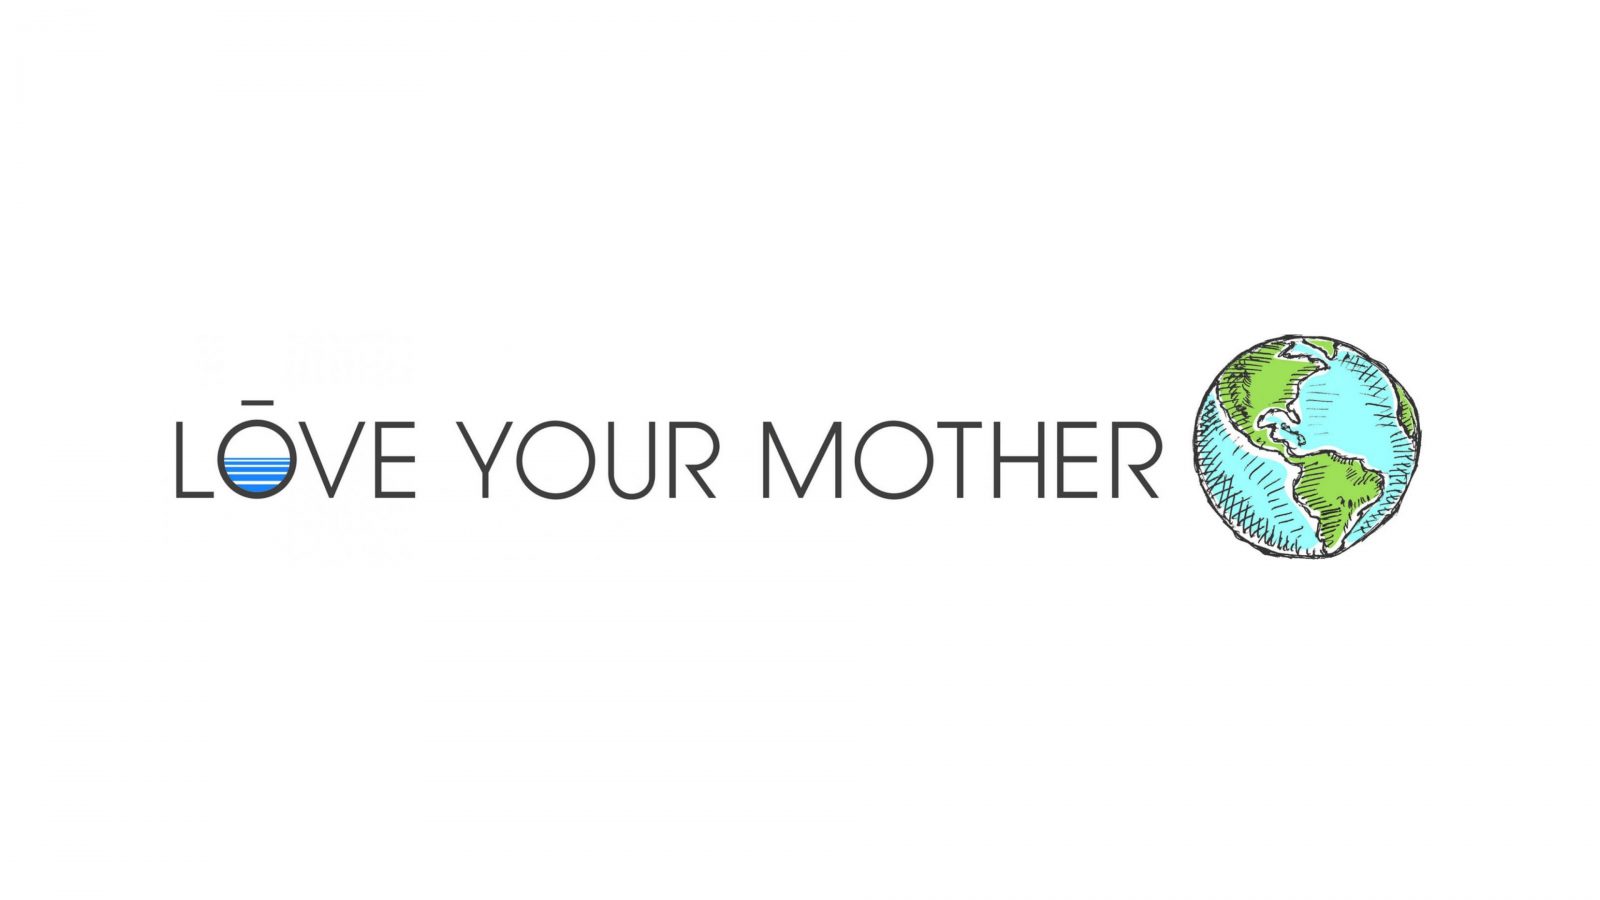 love your mother the solution volunteering - logo resized